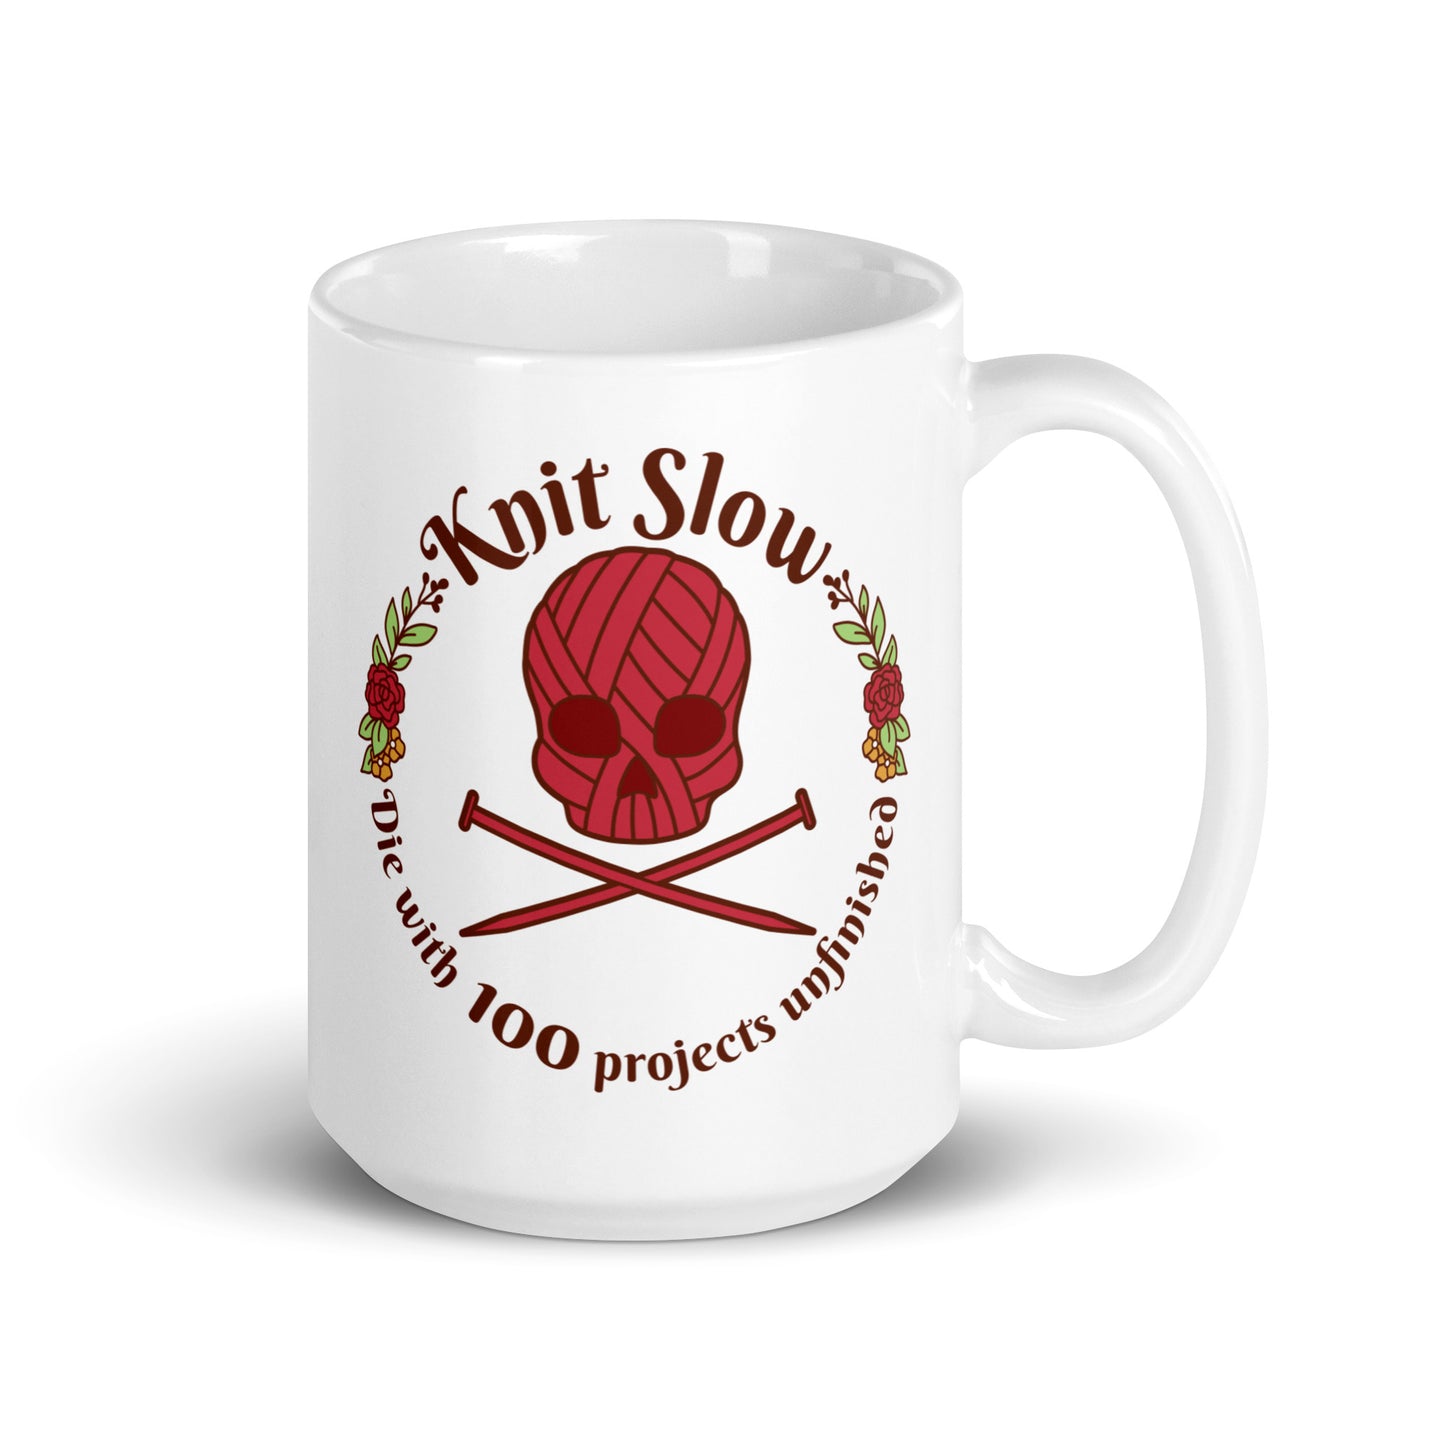 A white 15 ounce ceramic mug featuring an image of a skull and crossbones made of yarn and knitting needles. A floral wreath surrounds the skull, along with words that read "Knit Slow, Die with 100 projects unfinished"